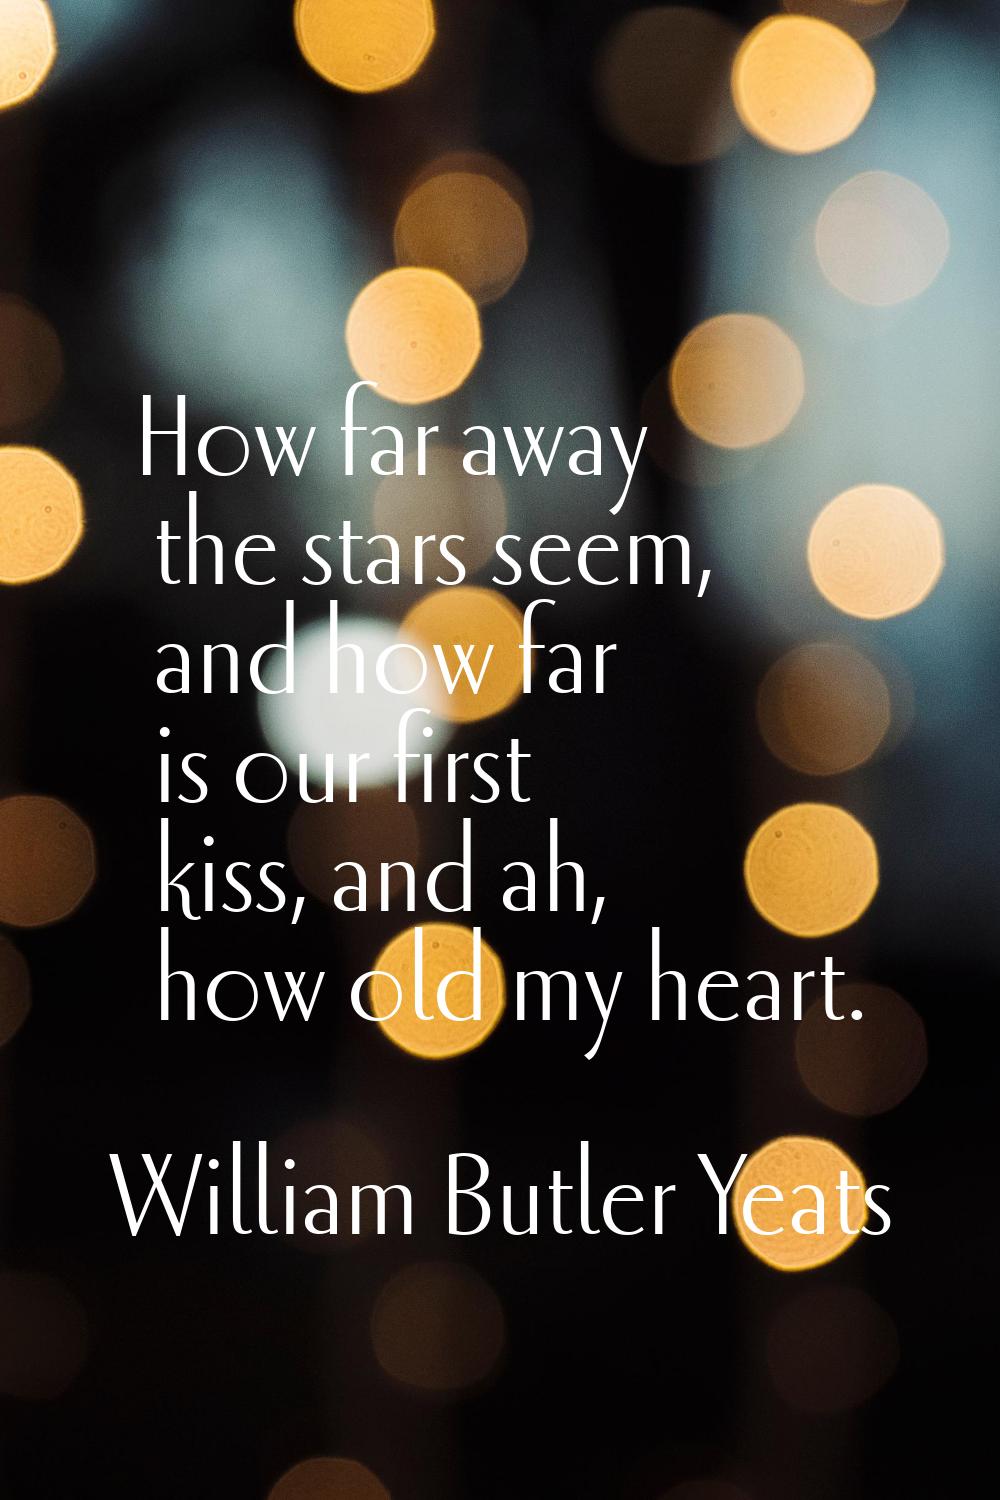 How far away the stars seem, and how far is our first kiss, and ah, how old my heart.